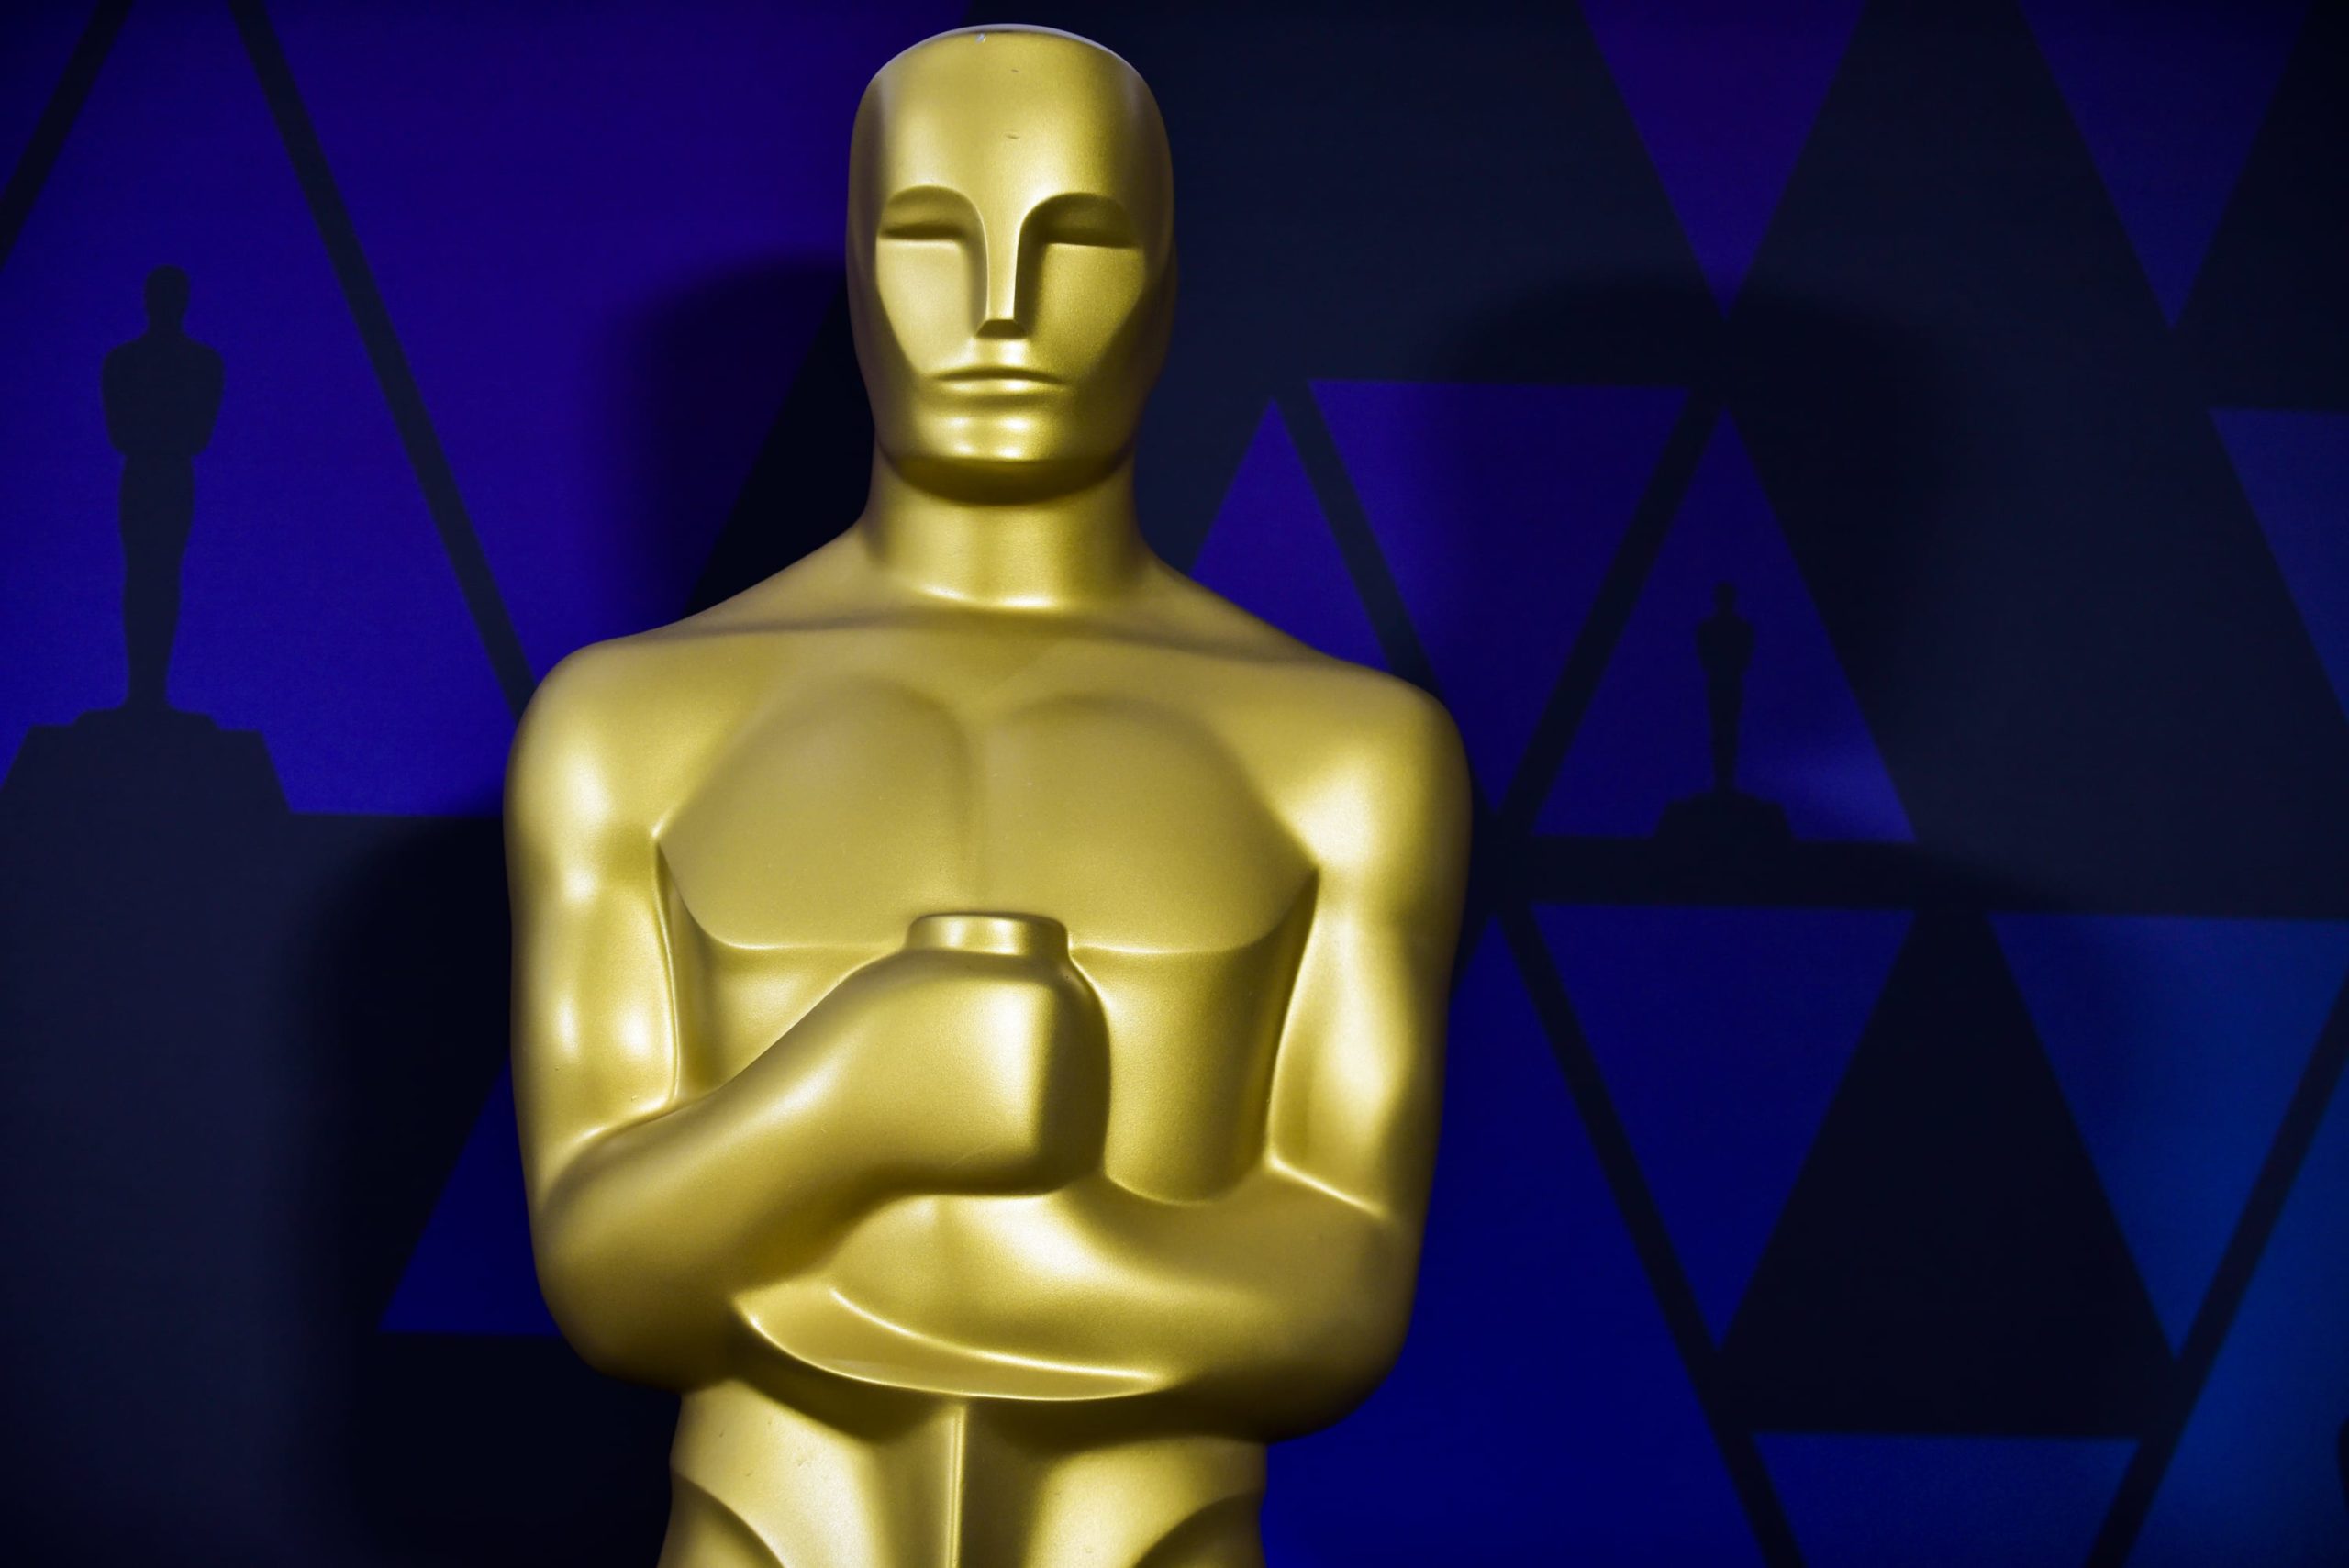 The academy seeks to make Oscars, filmmaking extra inclusive